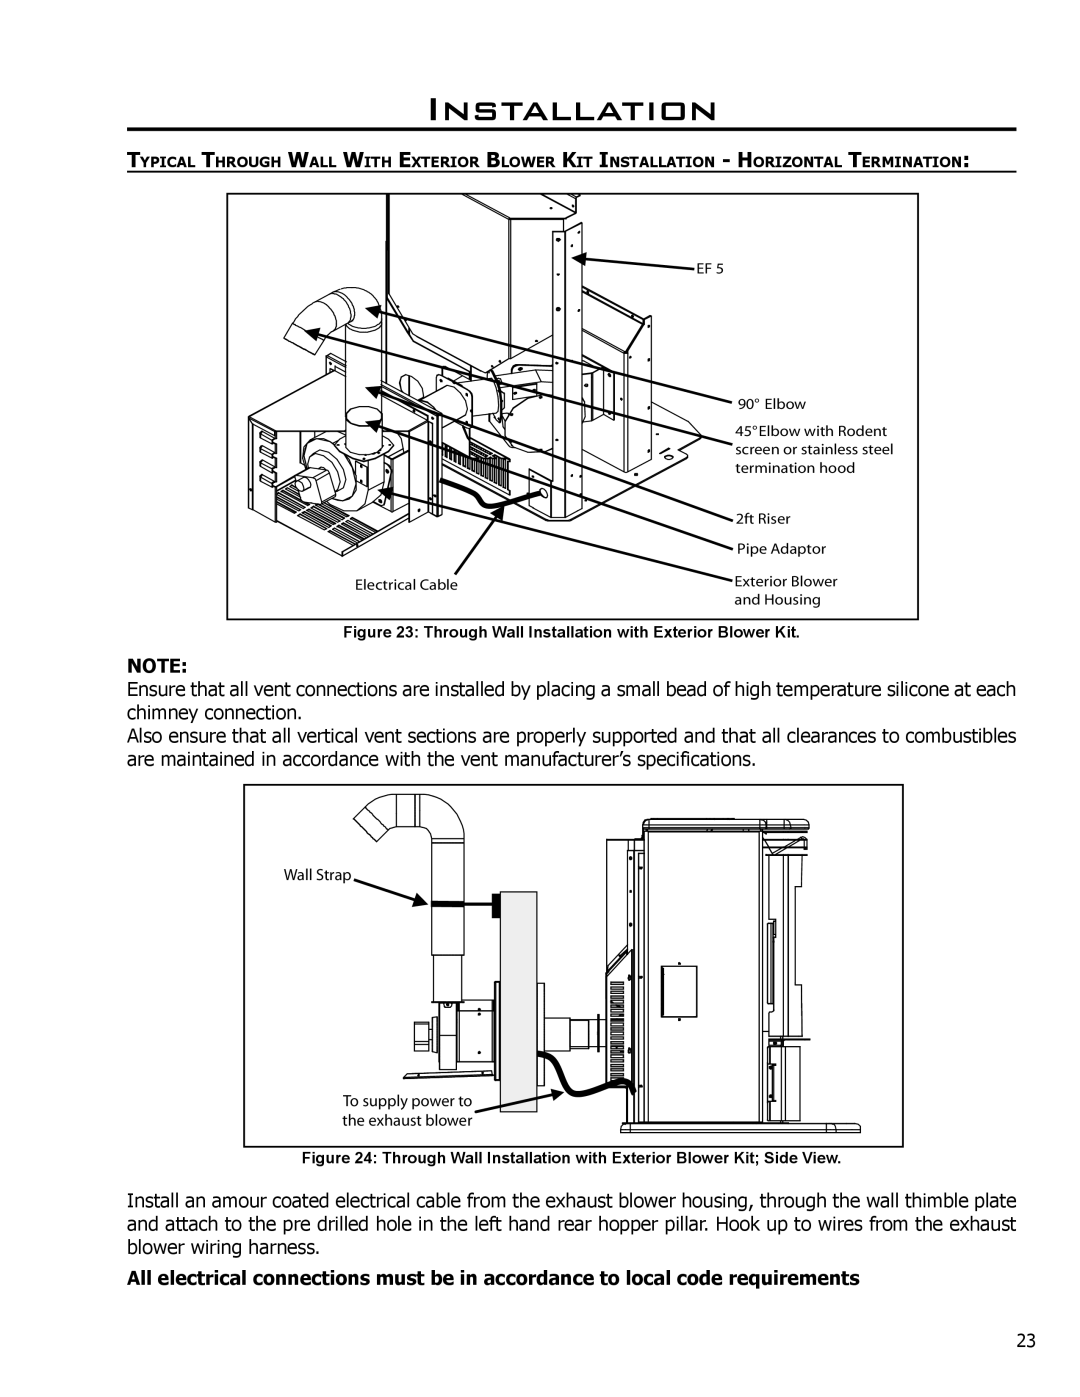 Enviro C-10608 owner manual Through Wall Installation with Exterior Blower Kit 